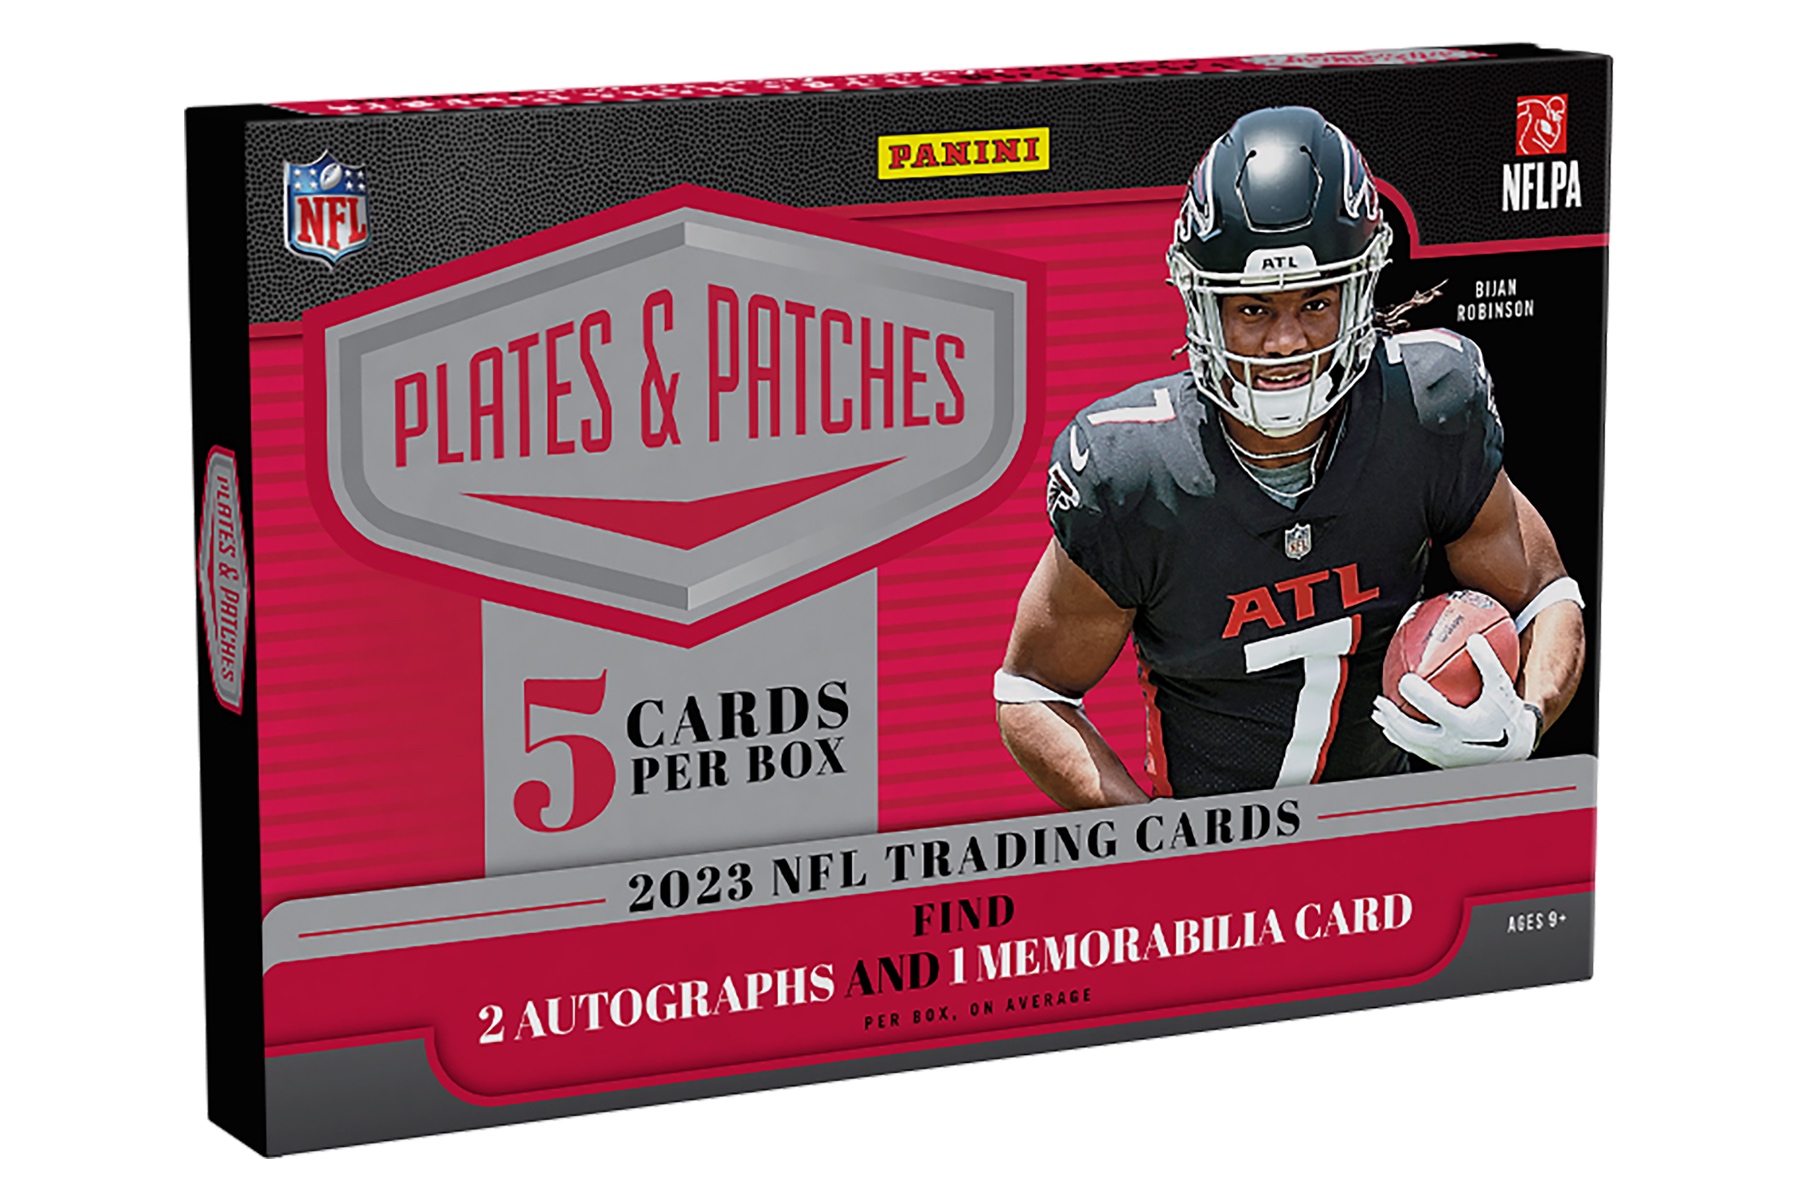 Arbitrator Rules Panini Can Continue Selling NFLPA Products